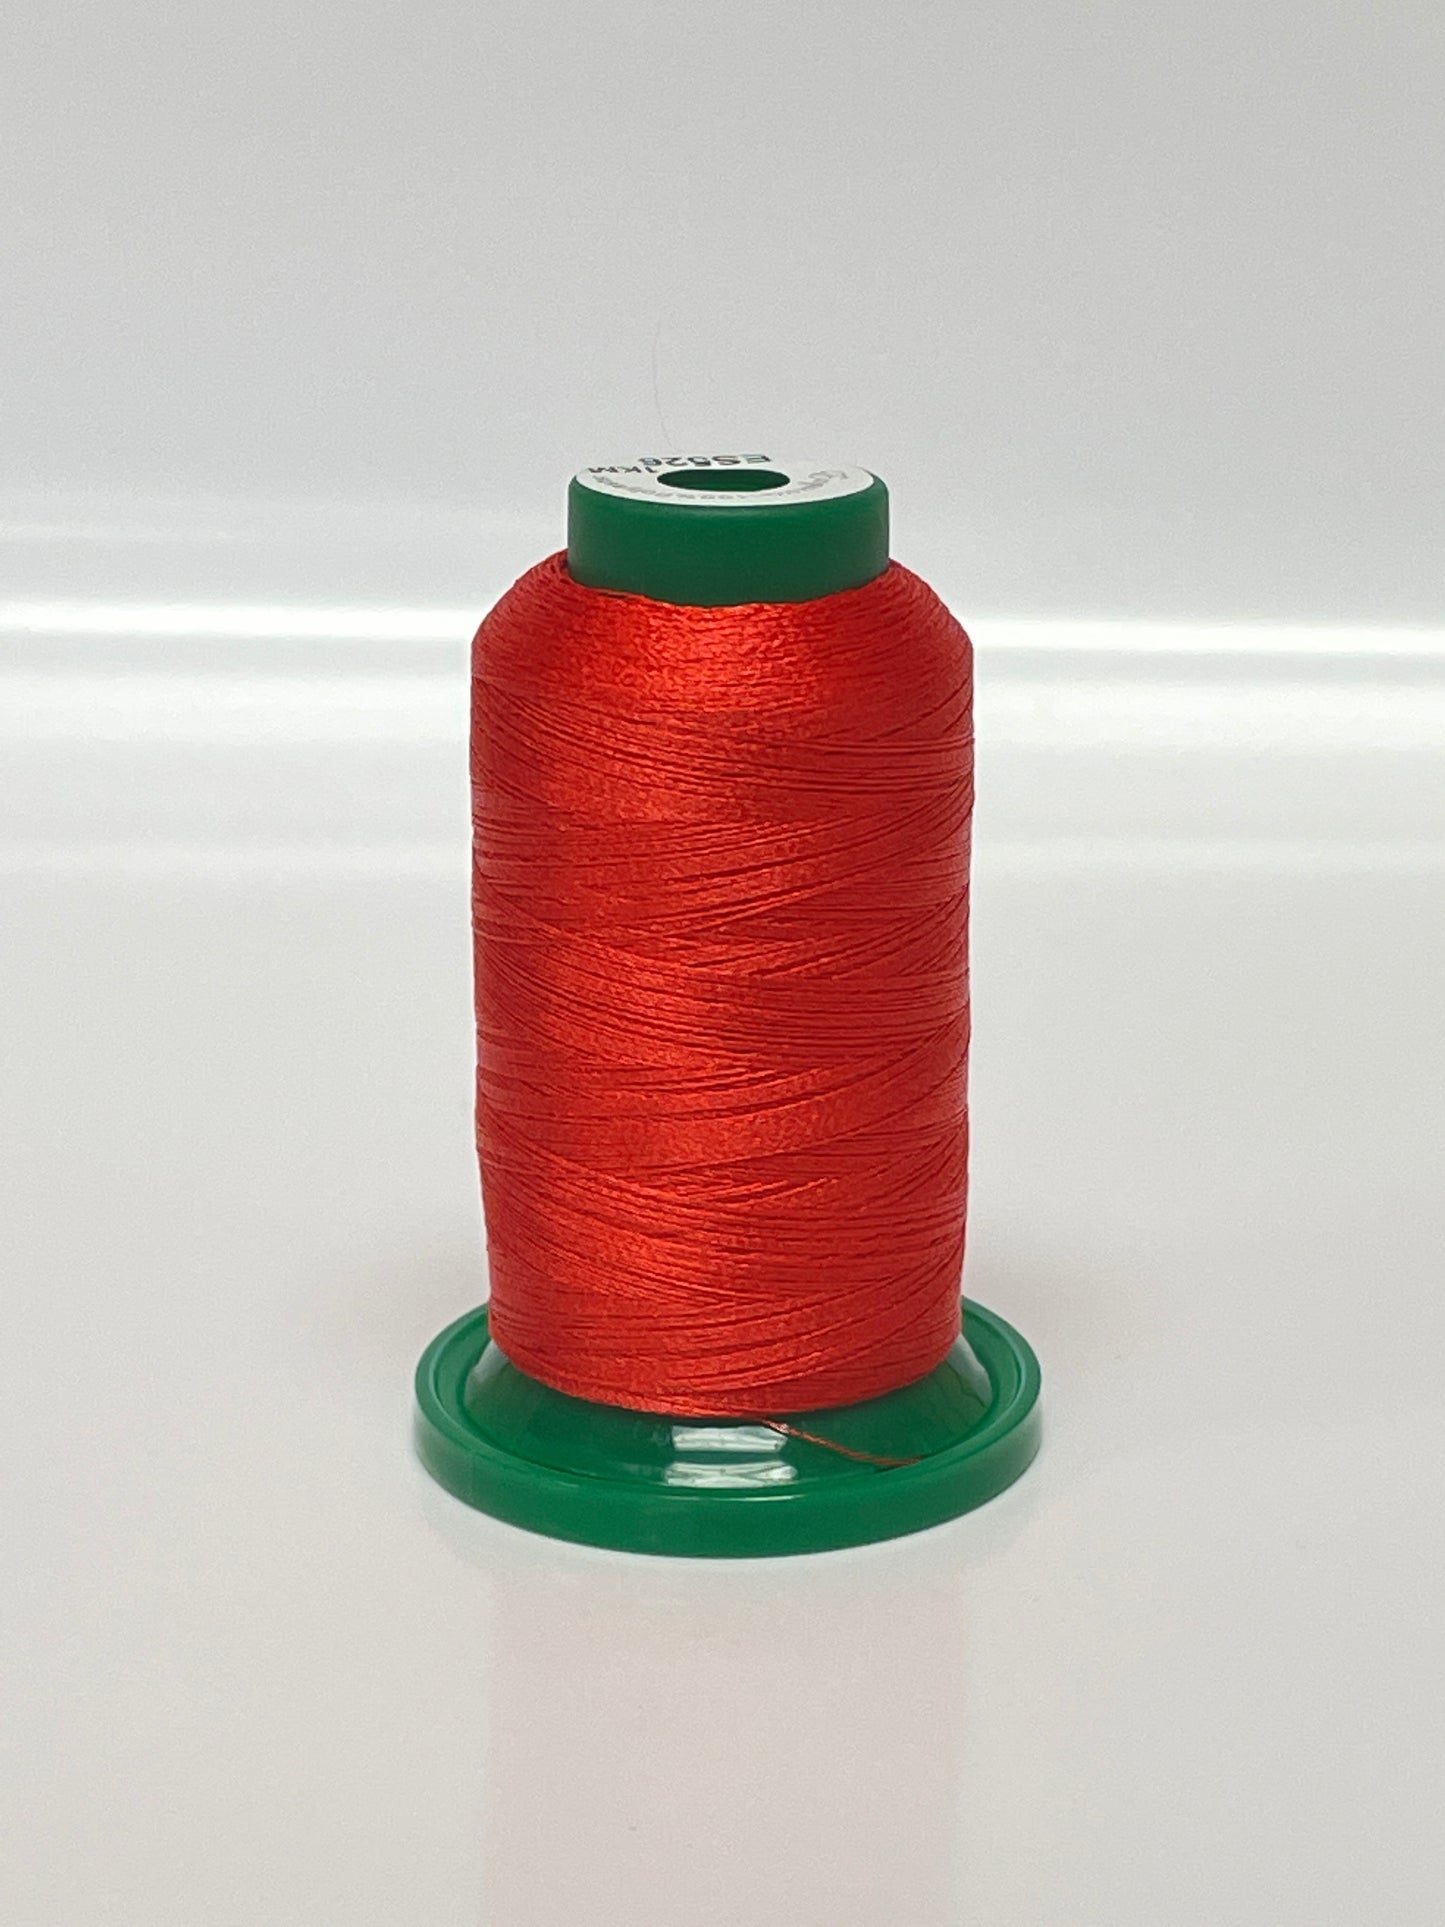 Exquisite Embroidery Threads - Reds